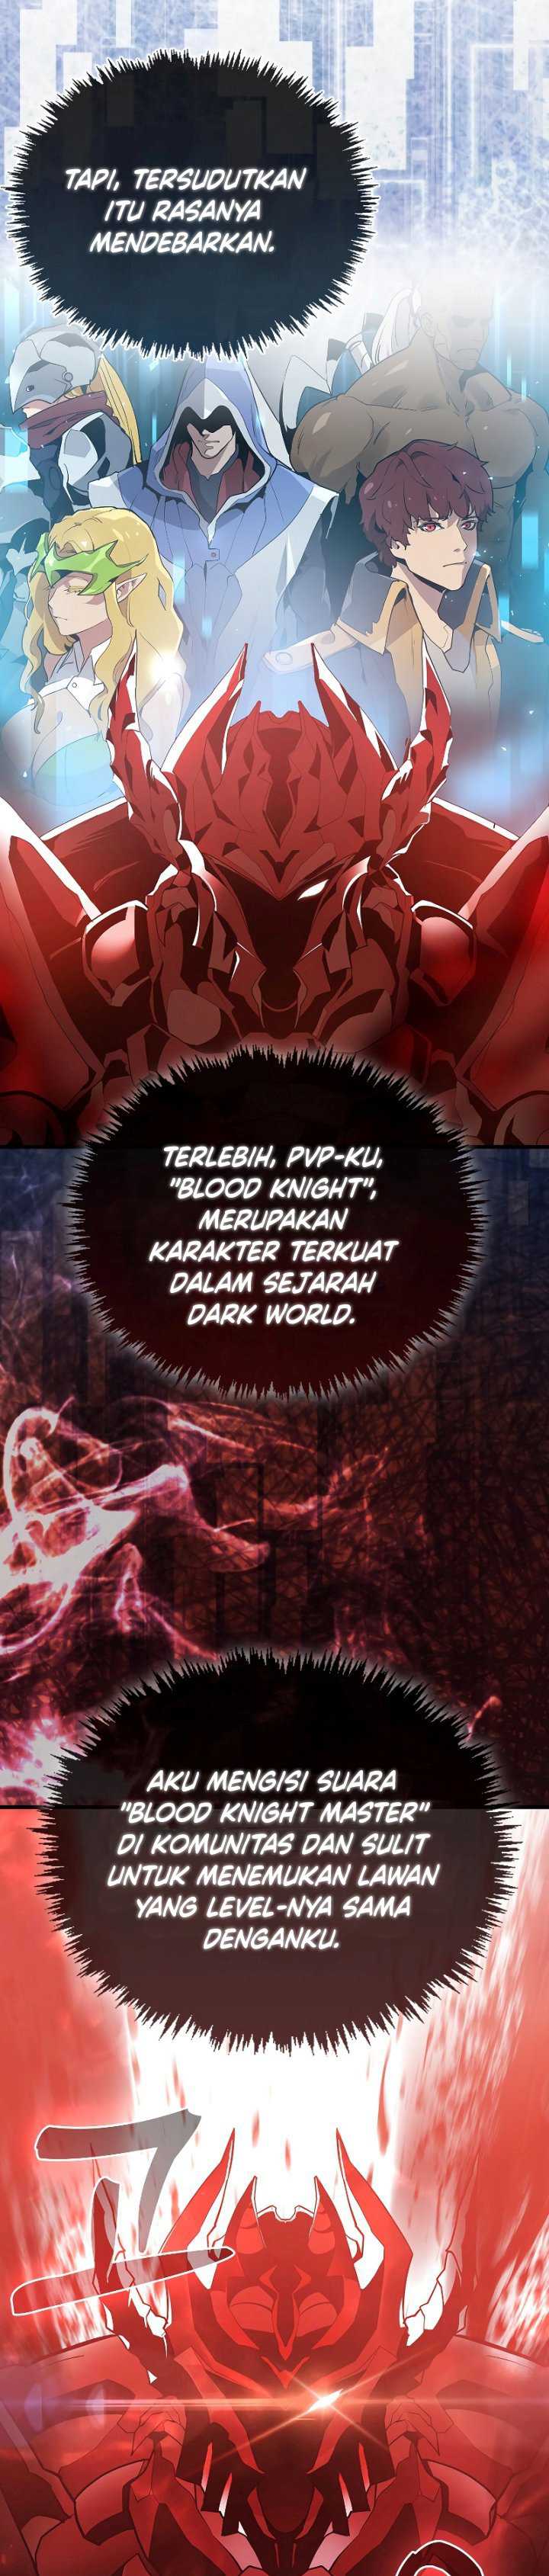 The Blood Knight’s Villains Chapter 01